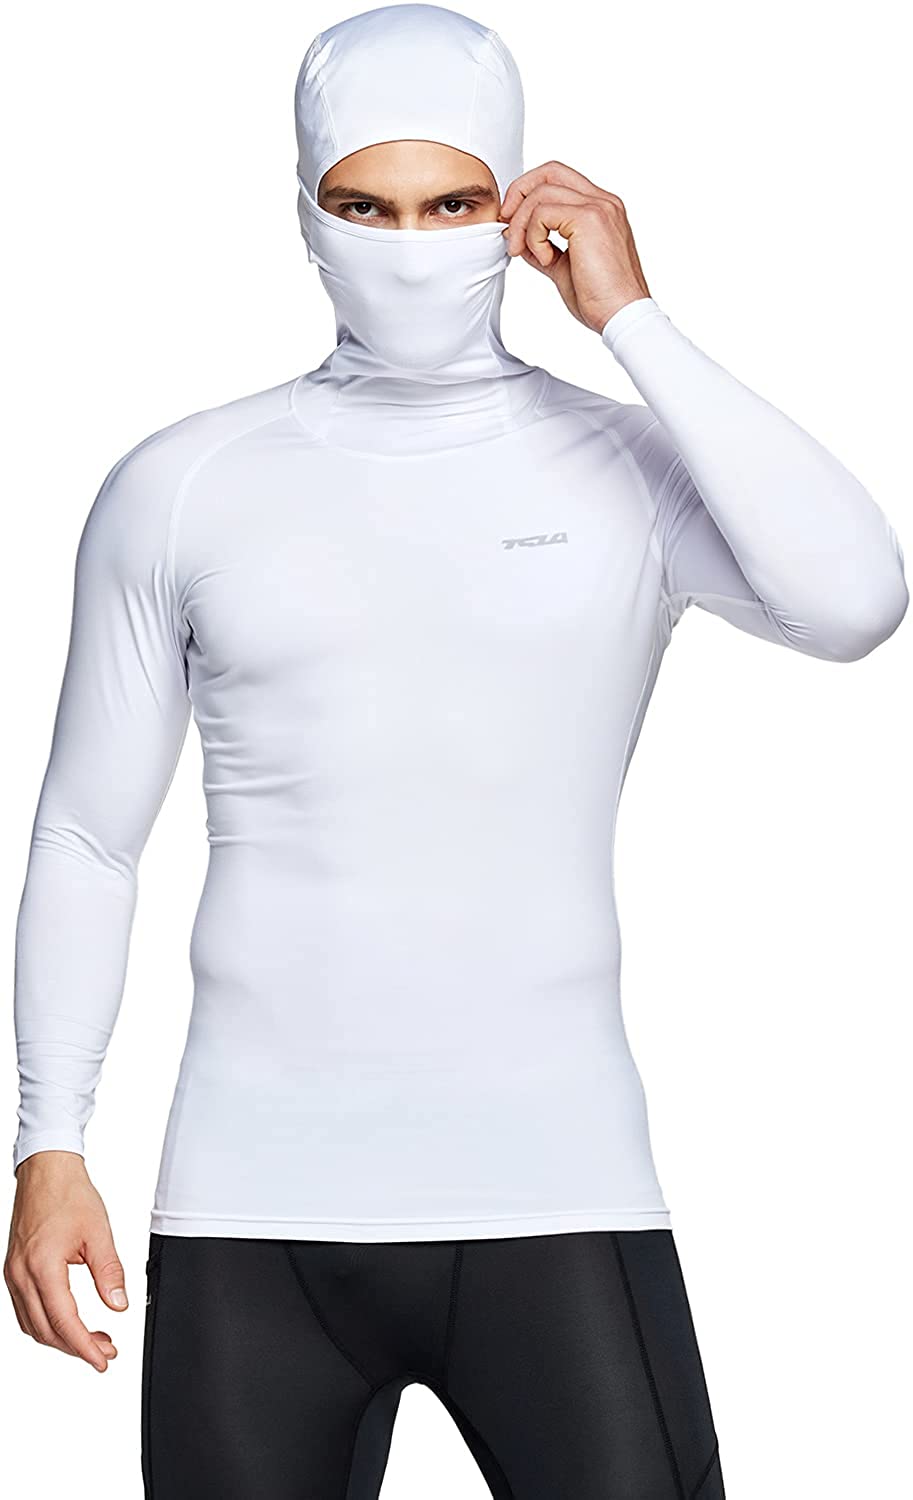 TSLA Men's Long Sleeve Workout Shirts Hoodie with Mask Cool Dry Fit Sports Compression Shirts UPF 50 